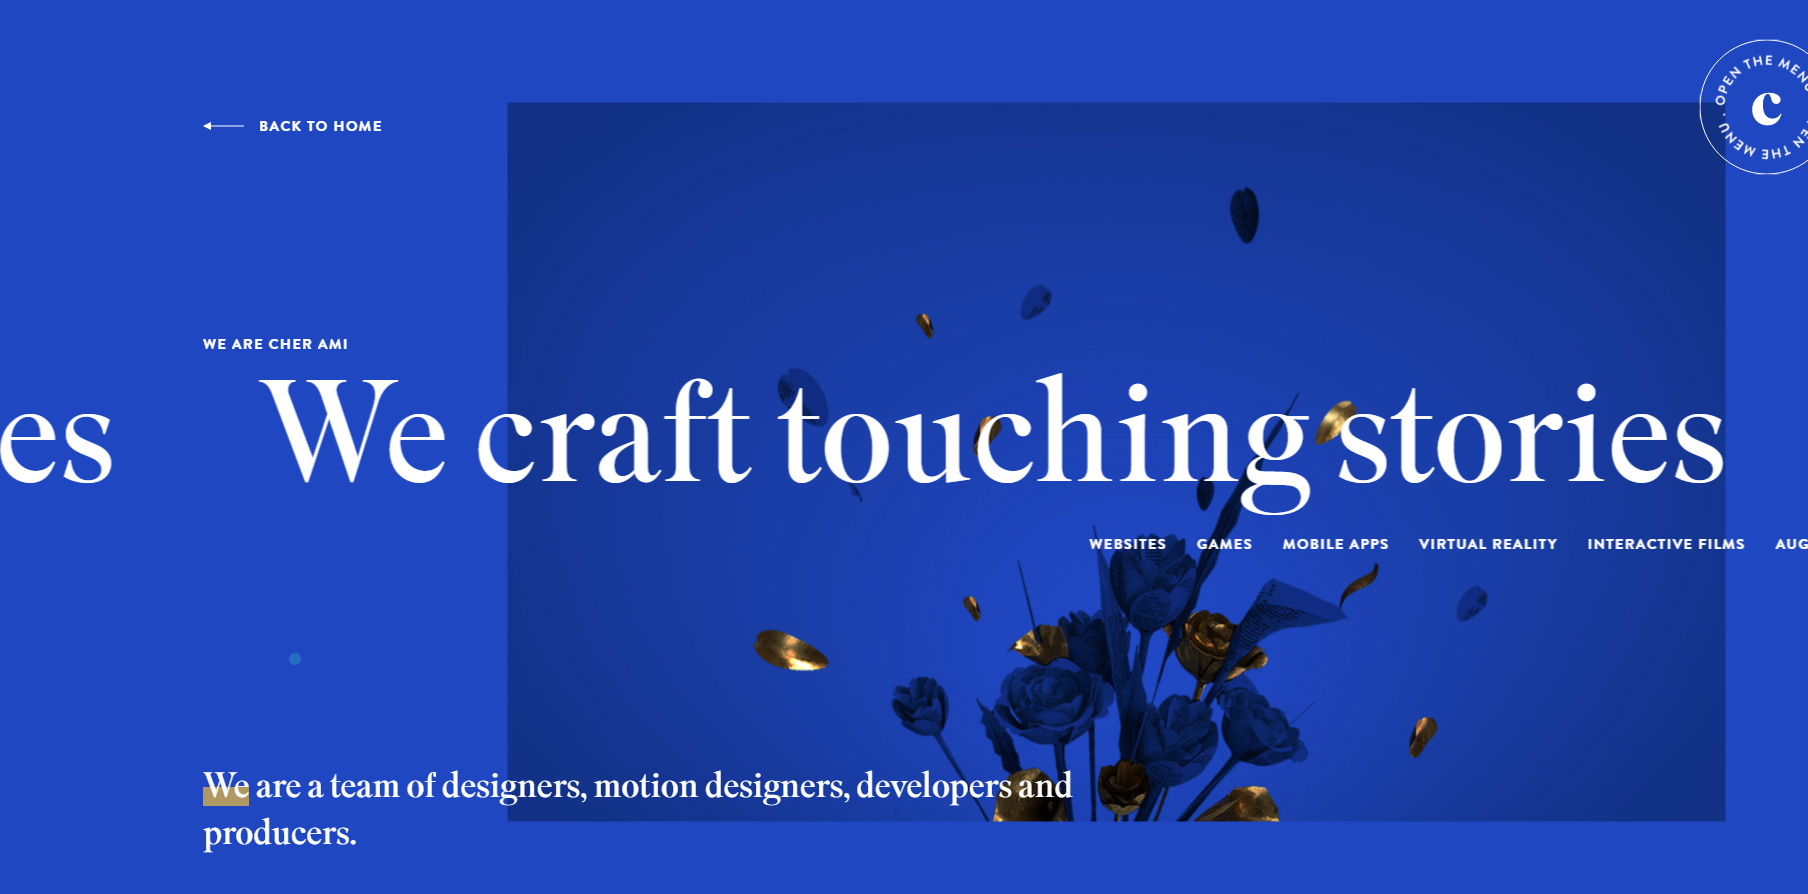 Cher Ami - Website of the Day